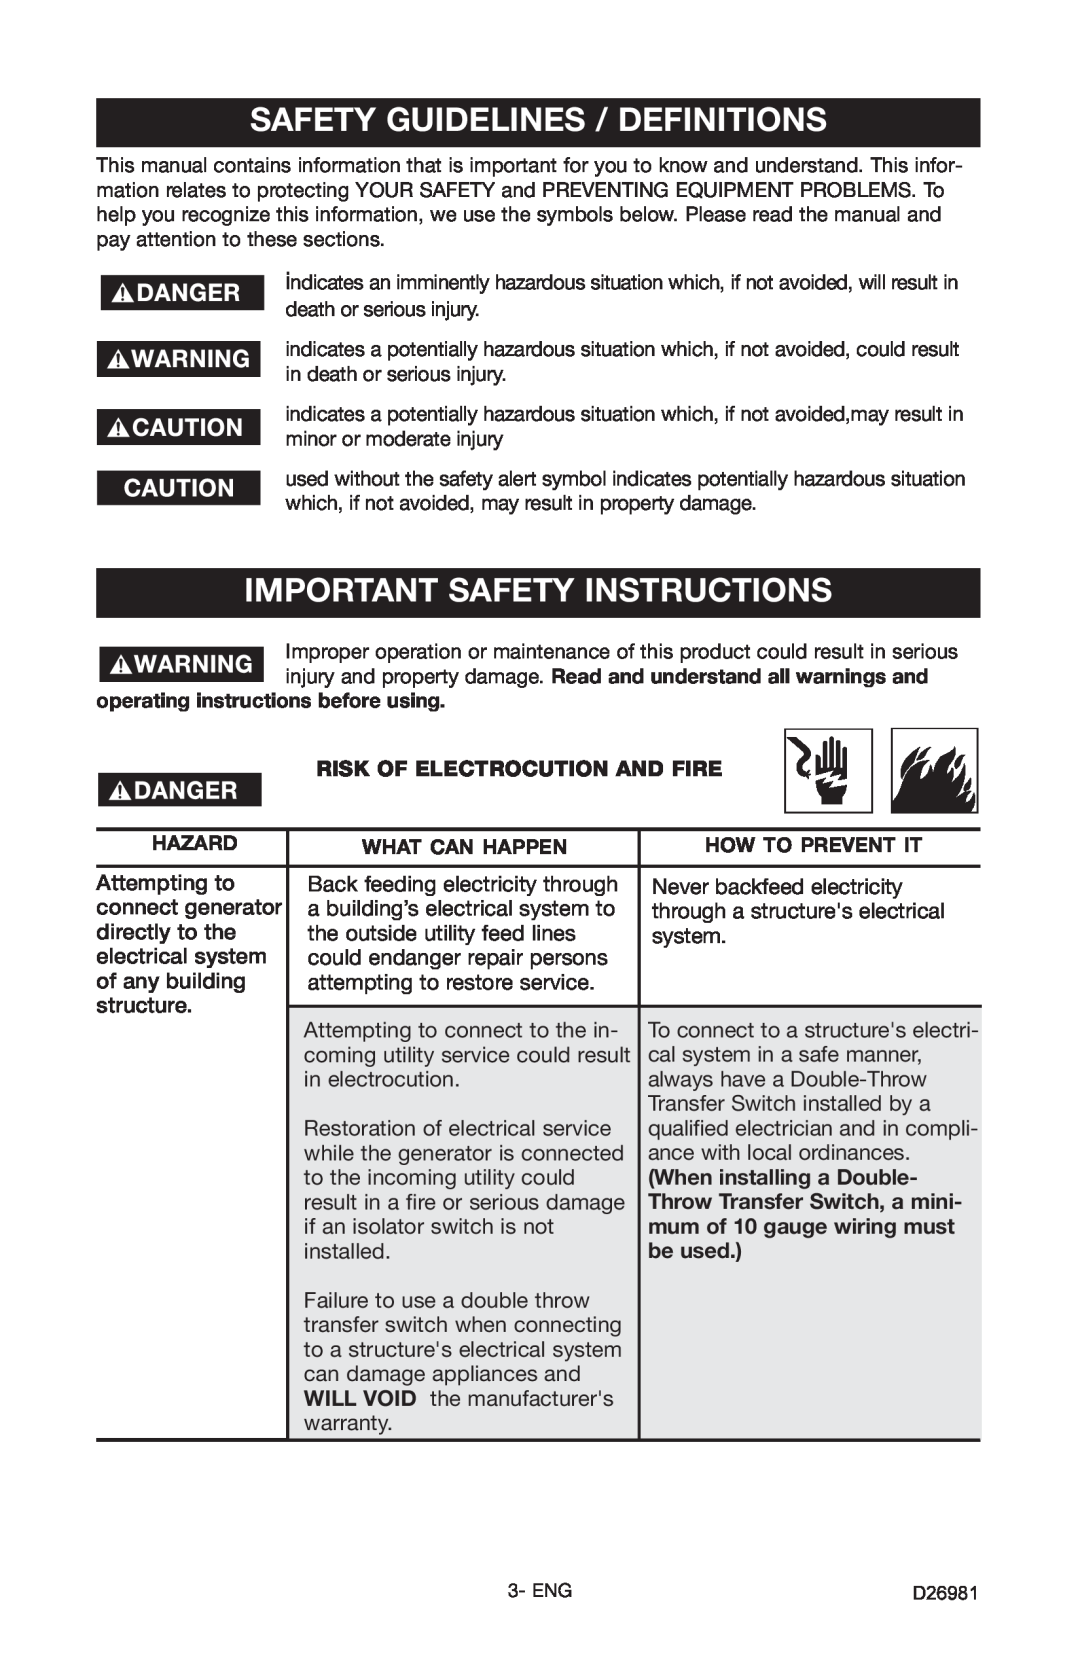 Porter-Cable D26981-028-0 Safety Guidelines / Definitions, Important Safety Instructions, Risk Of Electrocution And Fire 